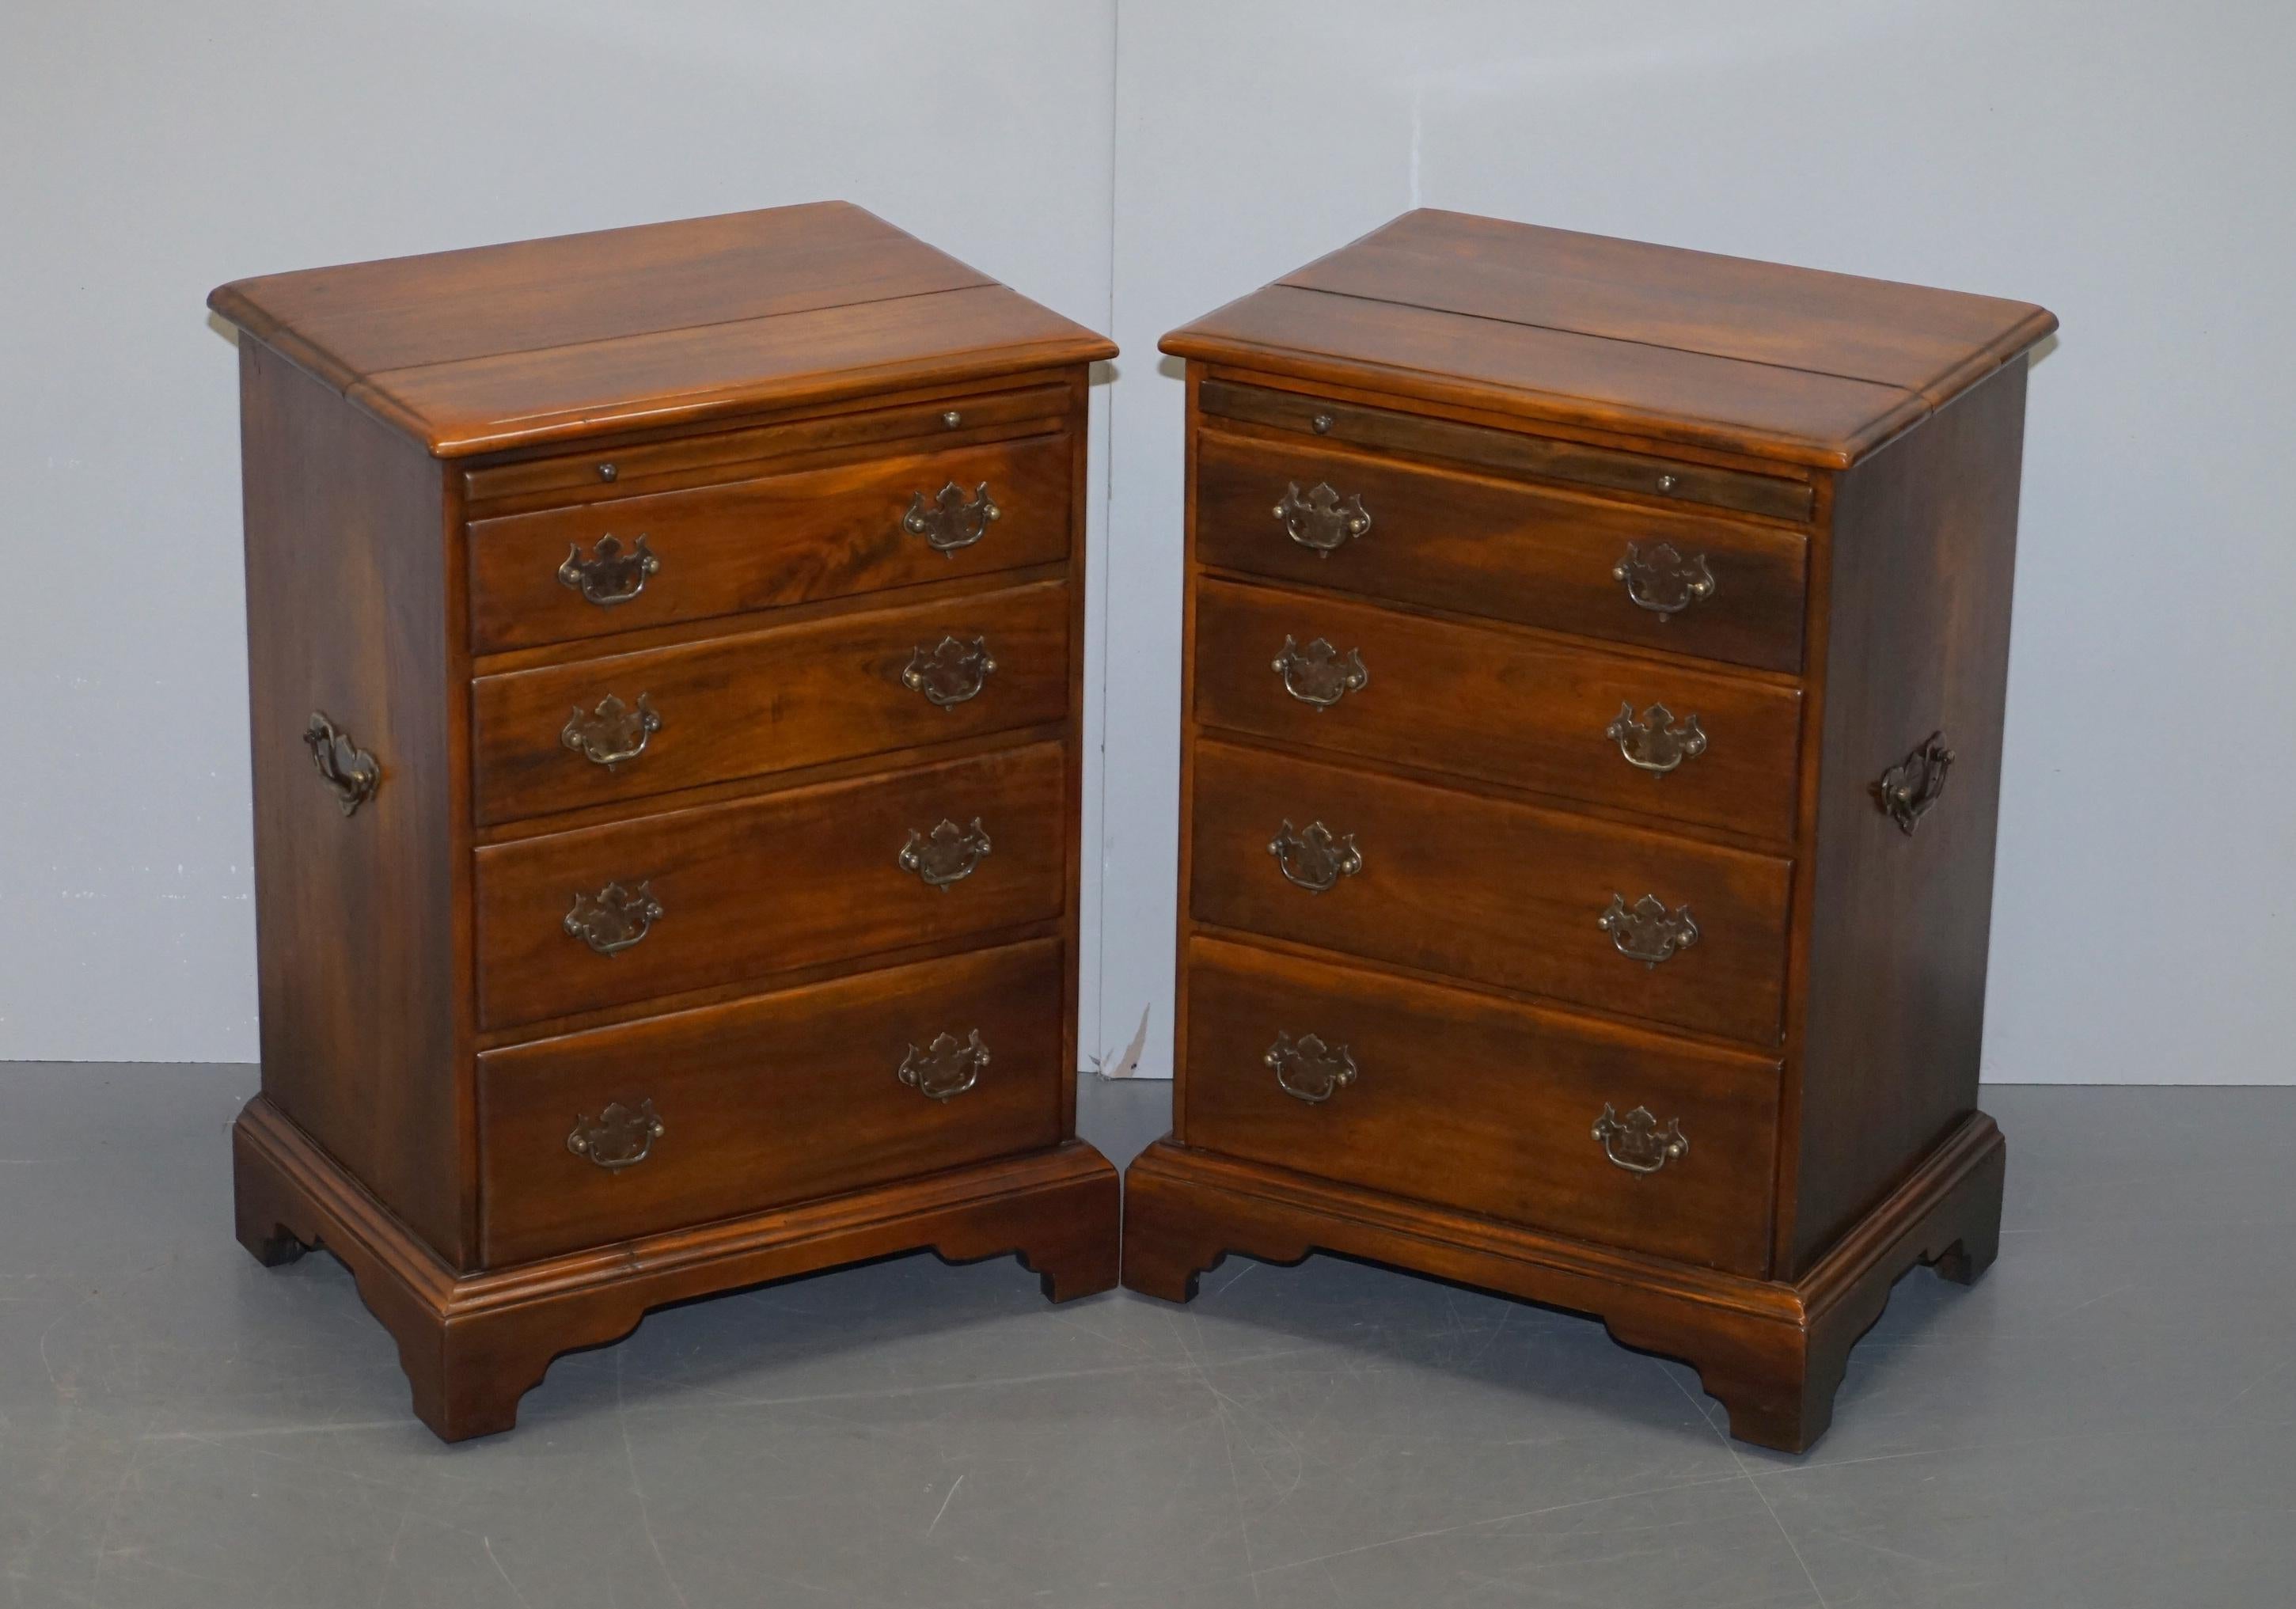 We are delighted to offer for sale this lovely pair of ex showroom condition RRP £3900 Theodore Alexander bedside table sized chests of drawers in the Military campaign style with brown leather topped butlers serving trays

A very good looking